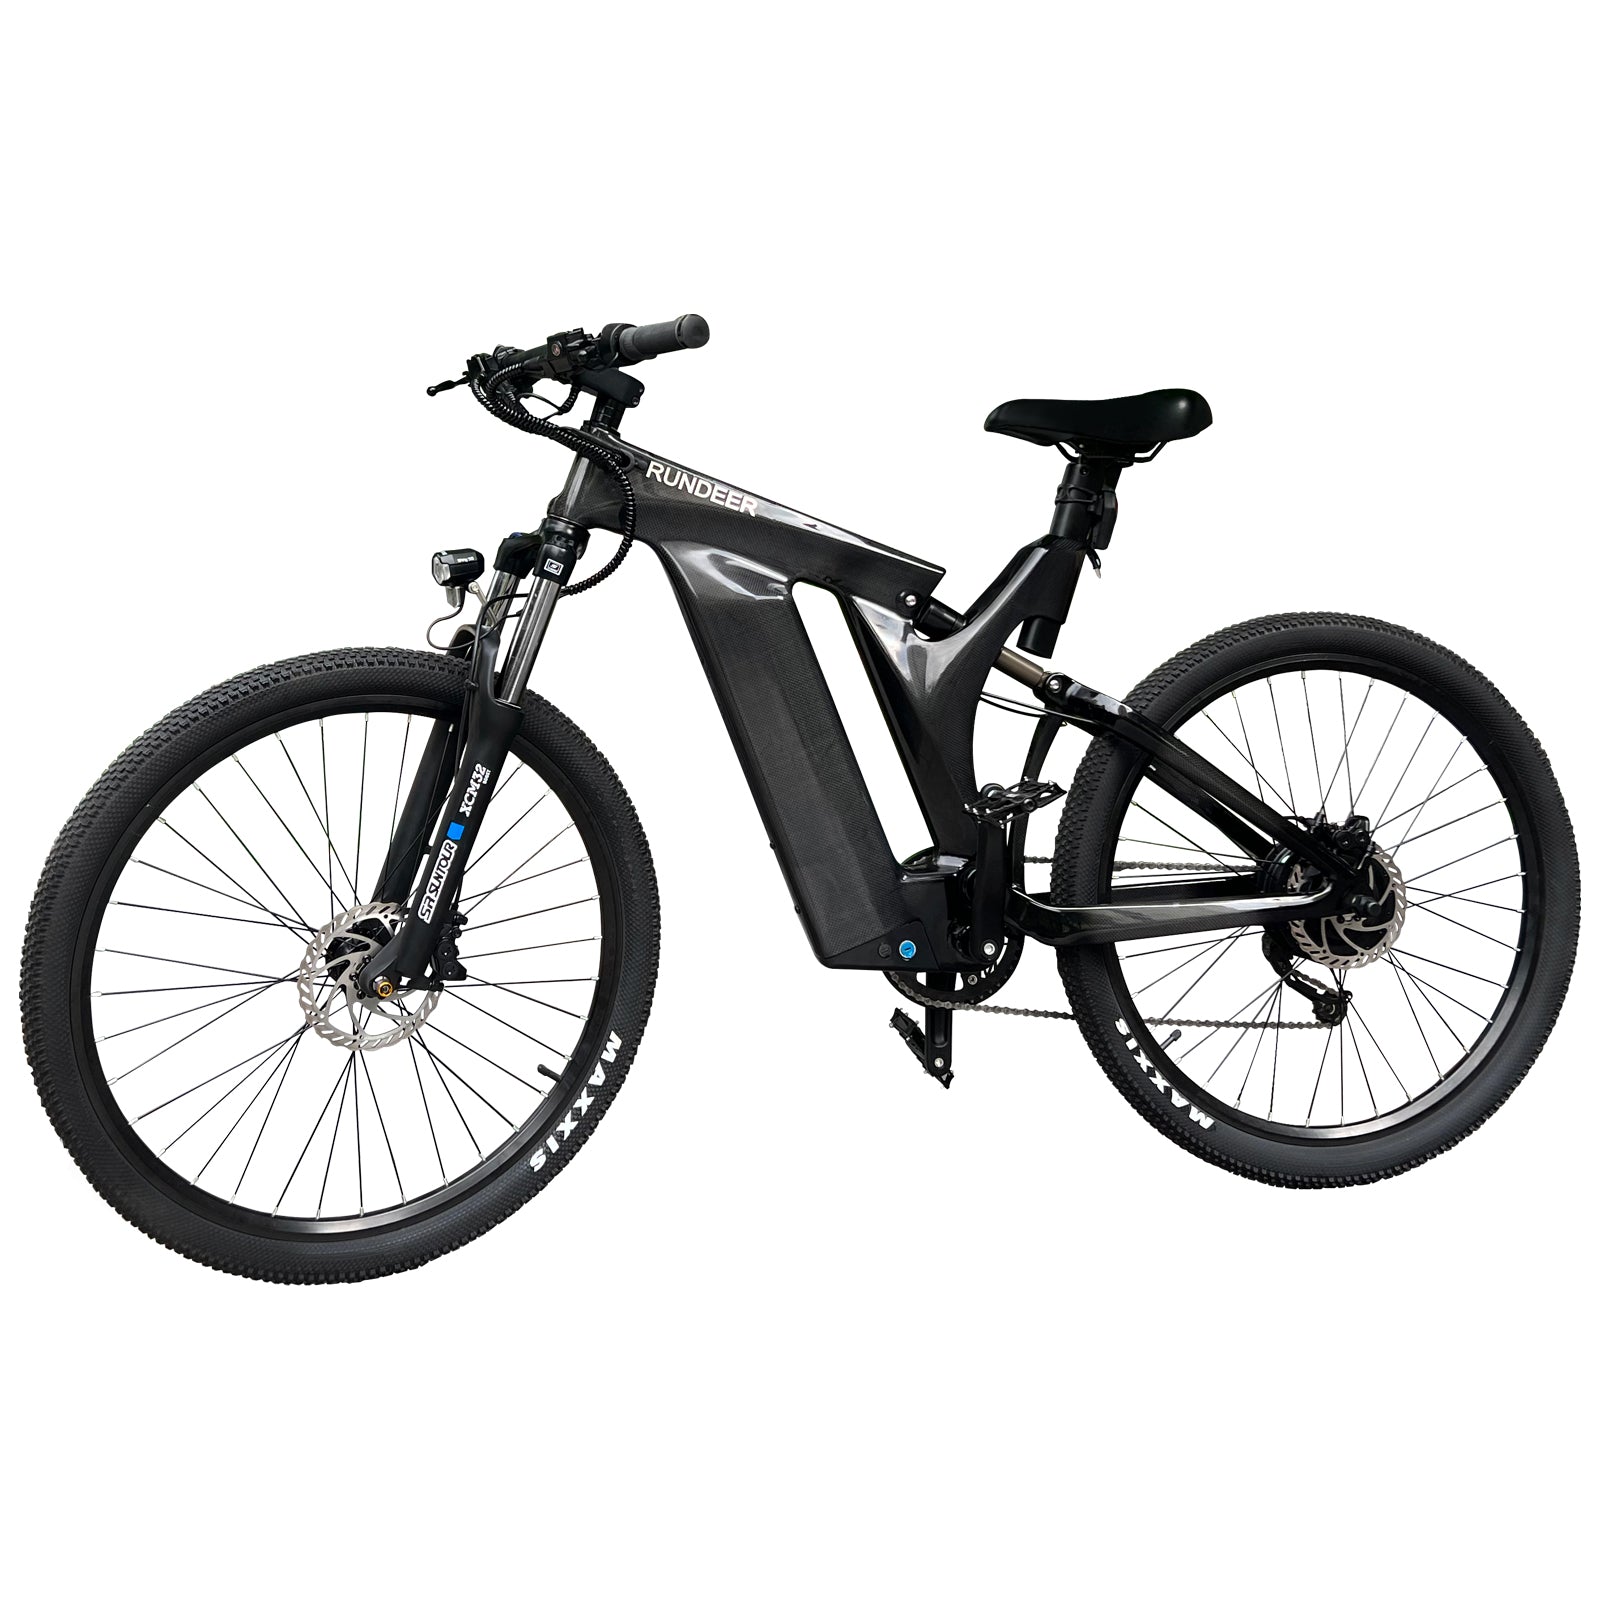 rundeer Commuter Electric Bikes for Sale